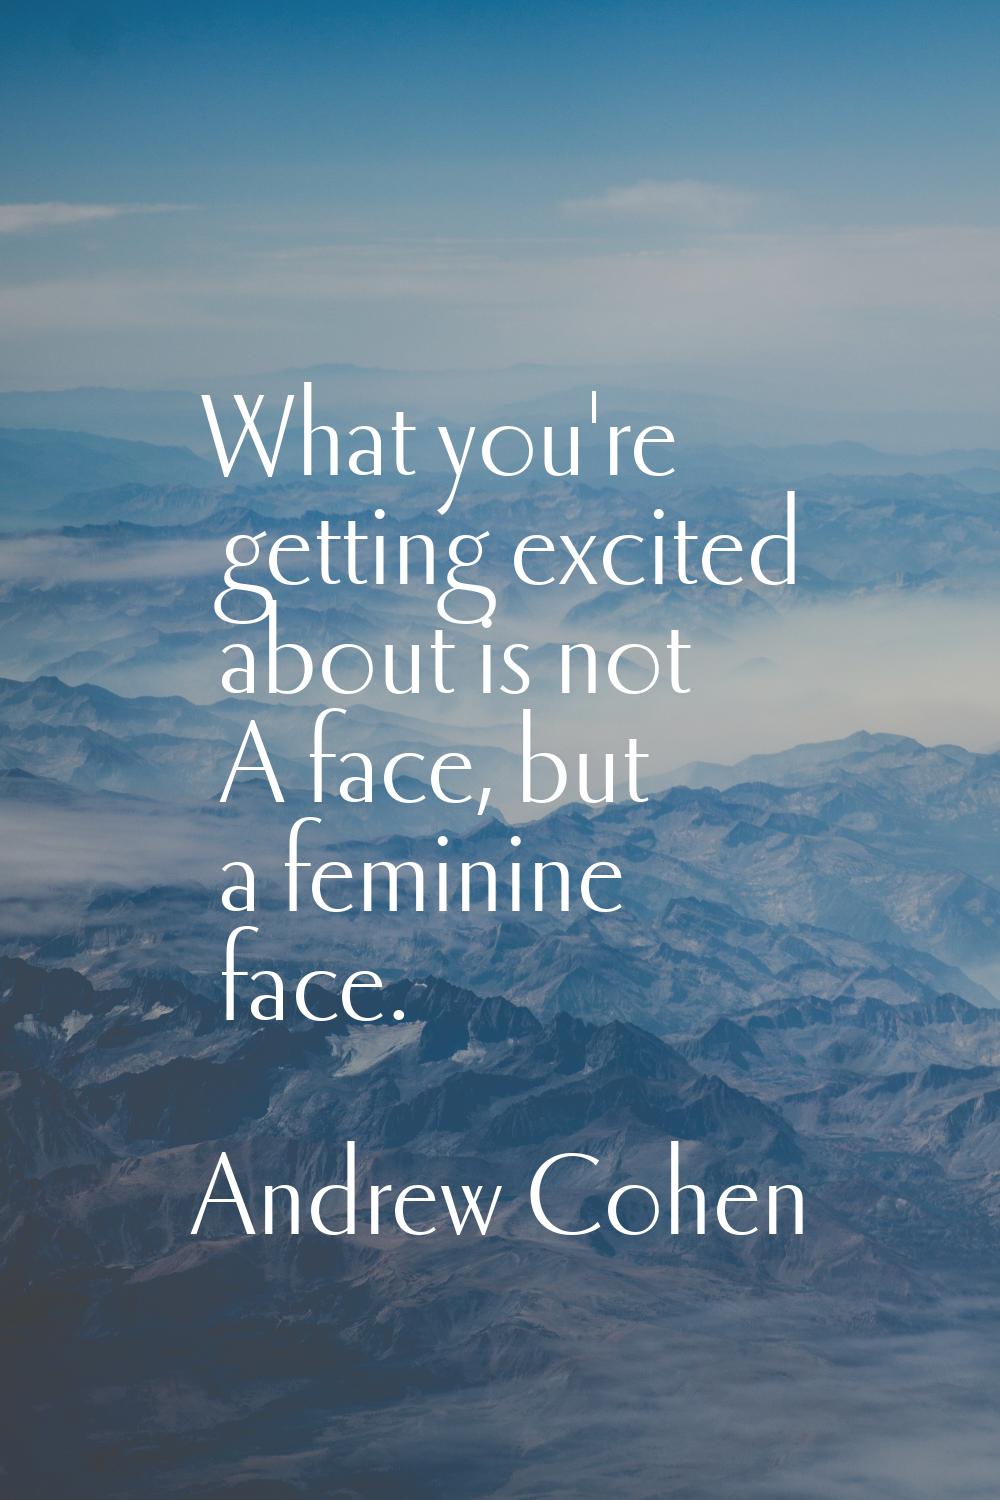 What you're getting excited about is not A face, but a feminine face.